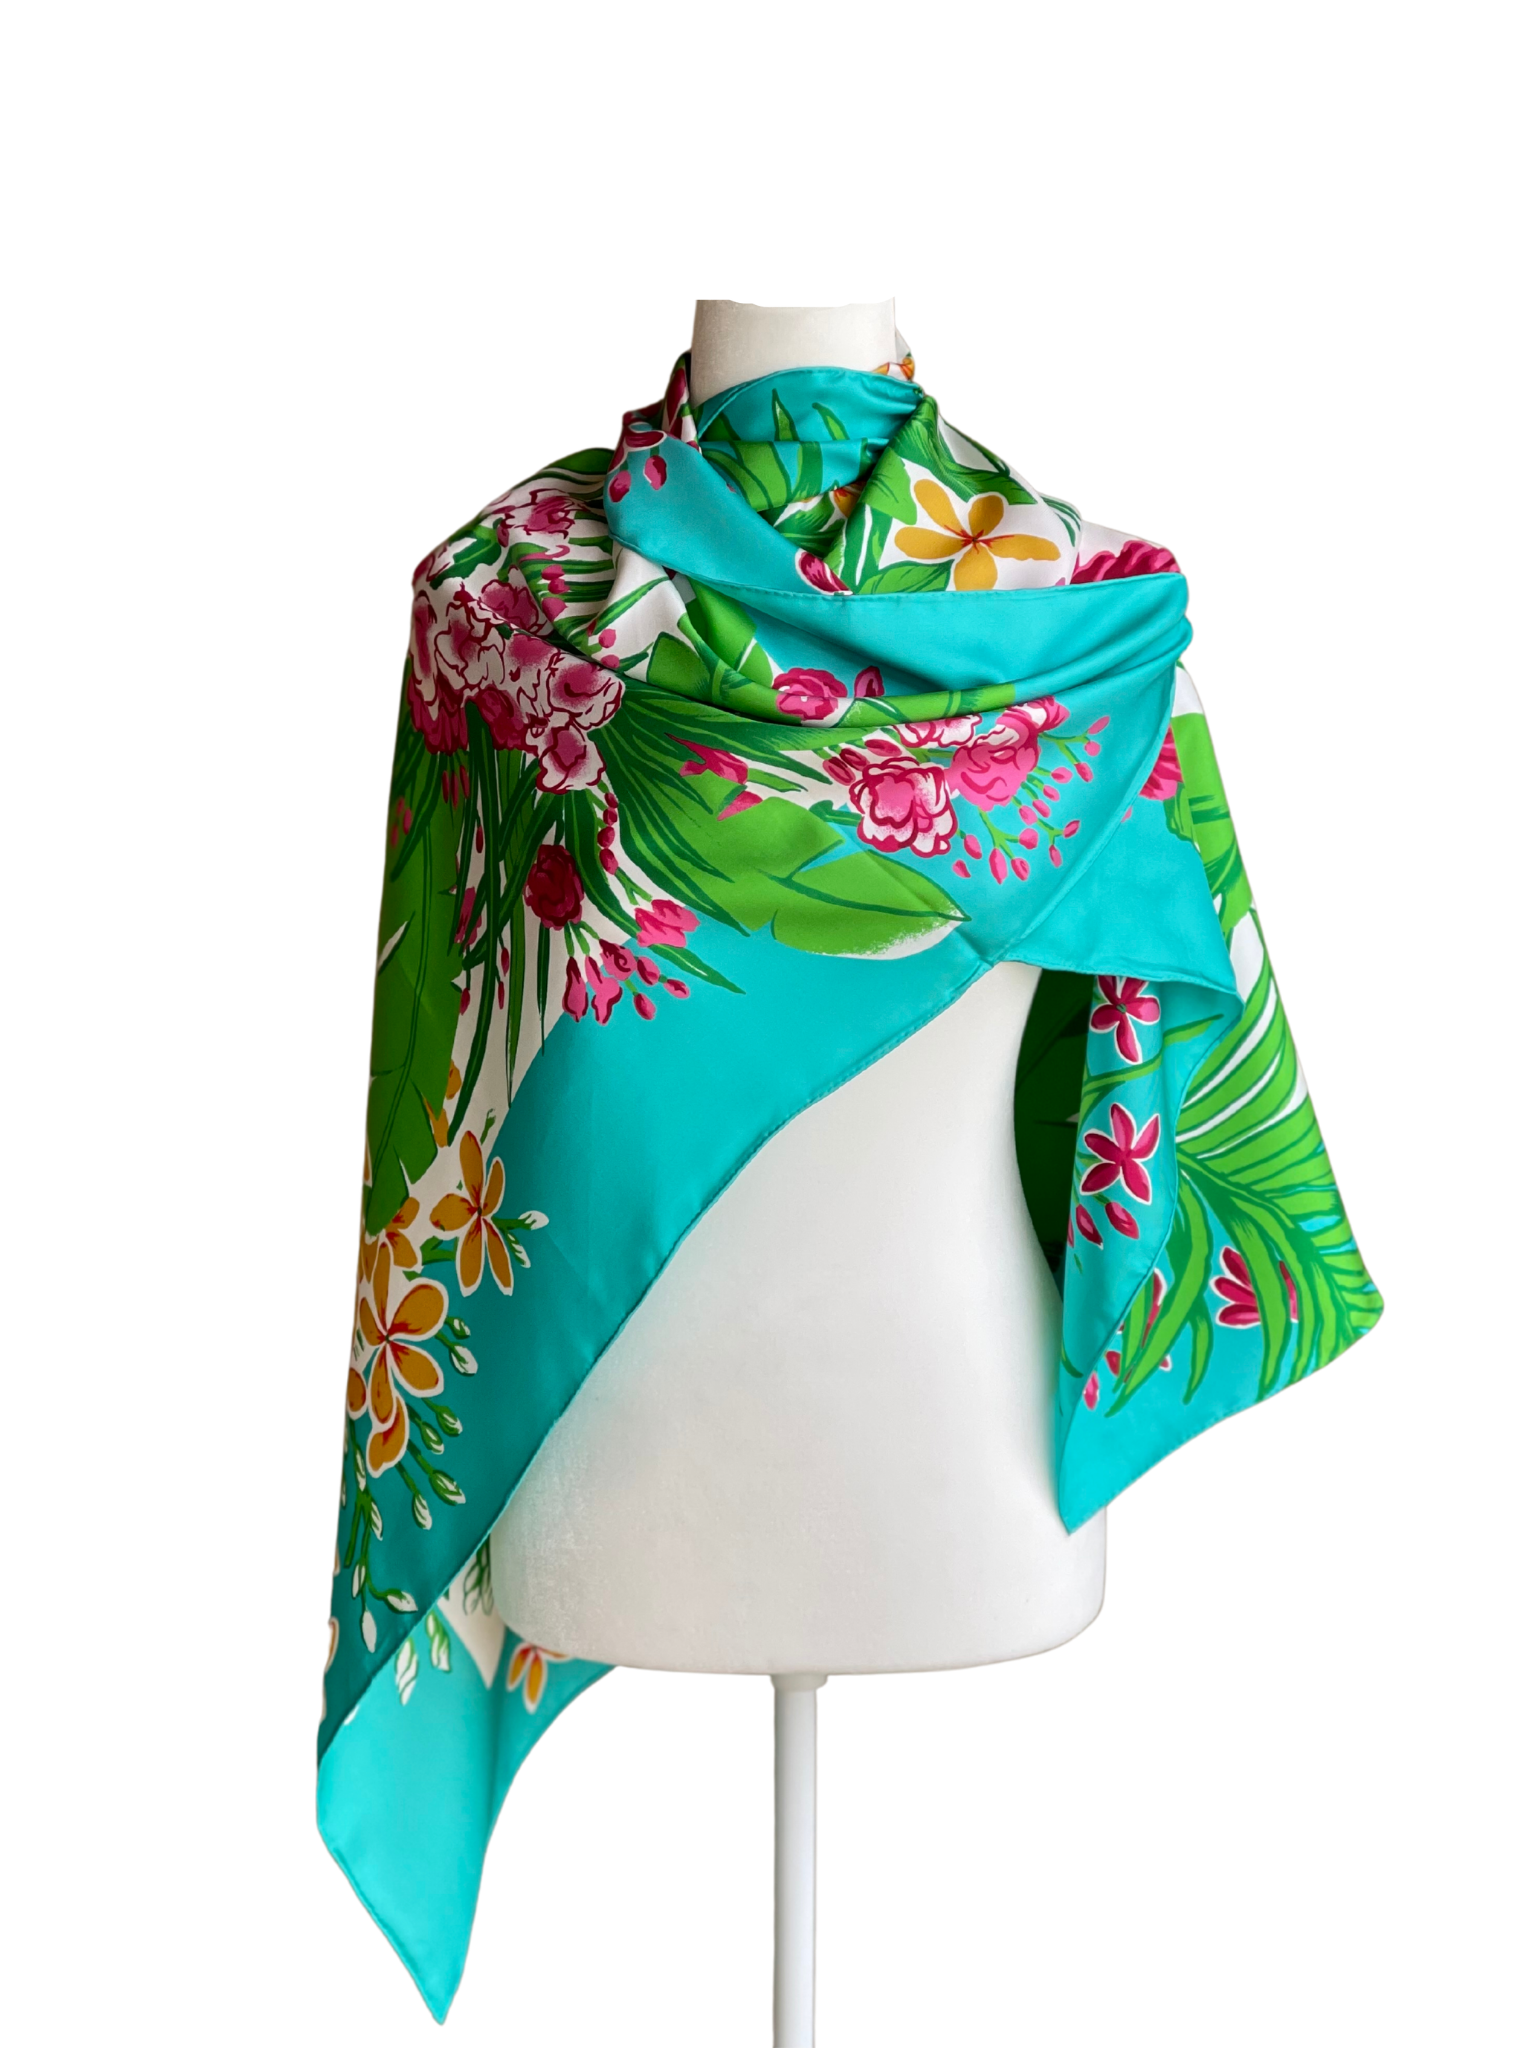 Scarf designs - silk, cashmere embroidered scarves in The Grand